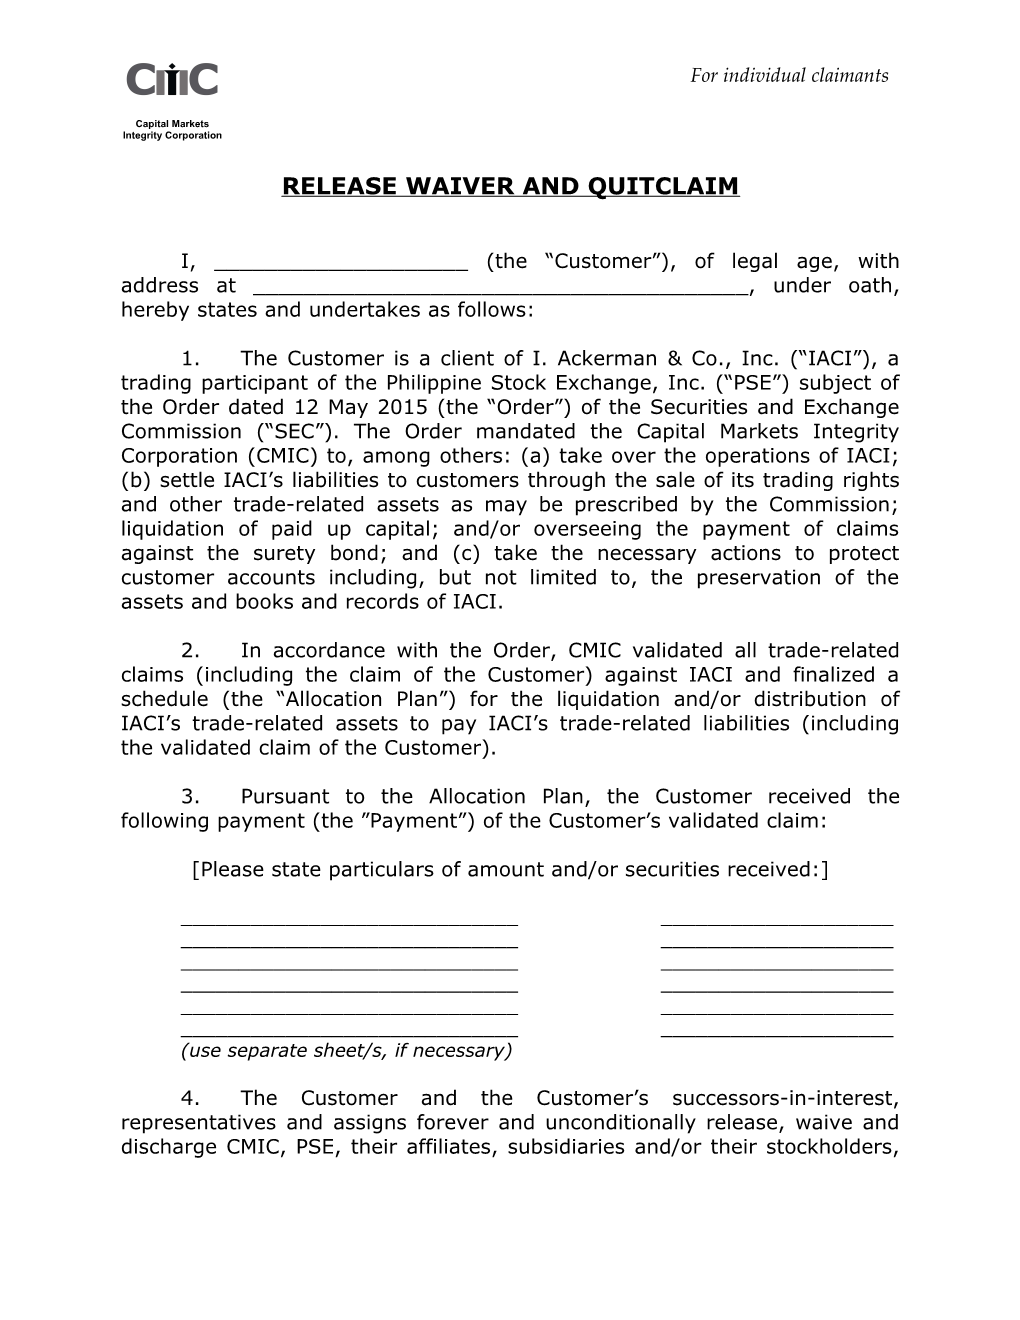 Release Waiver and Quitclaim